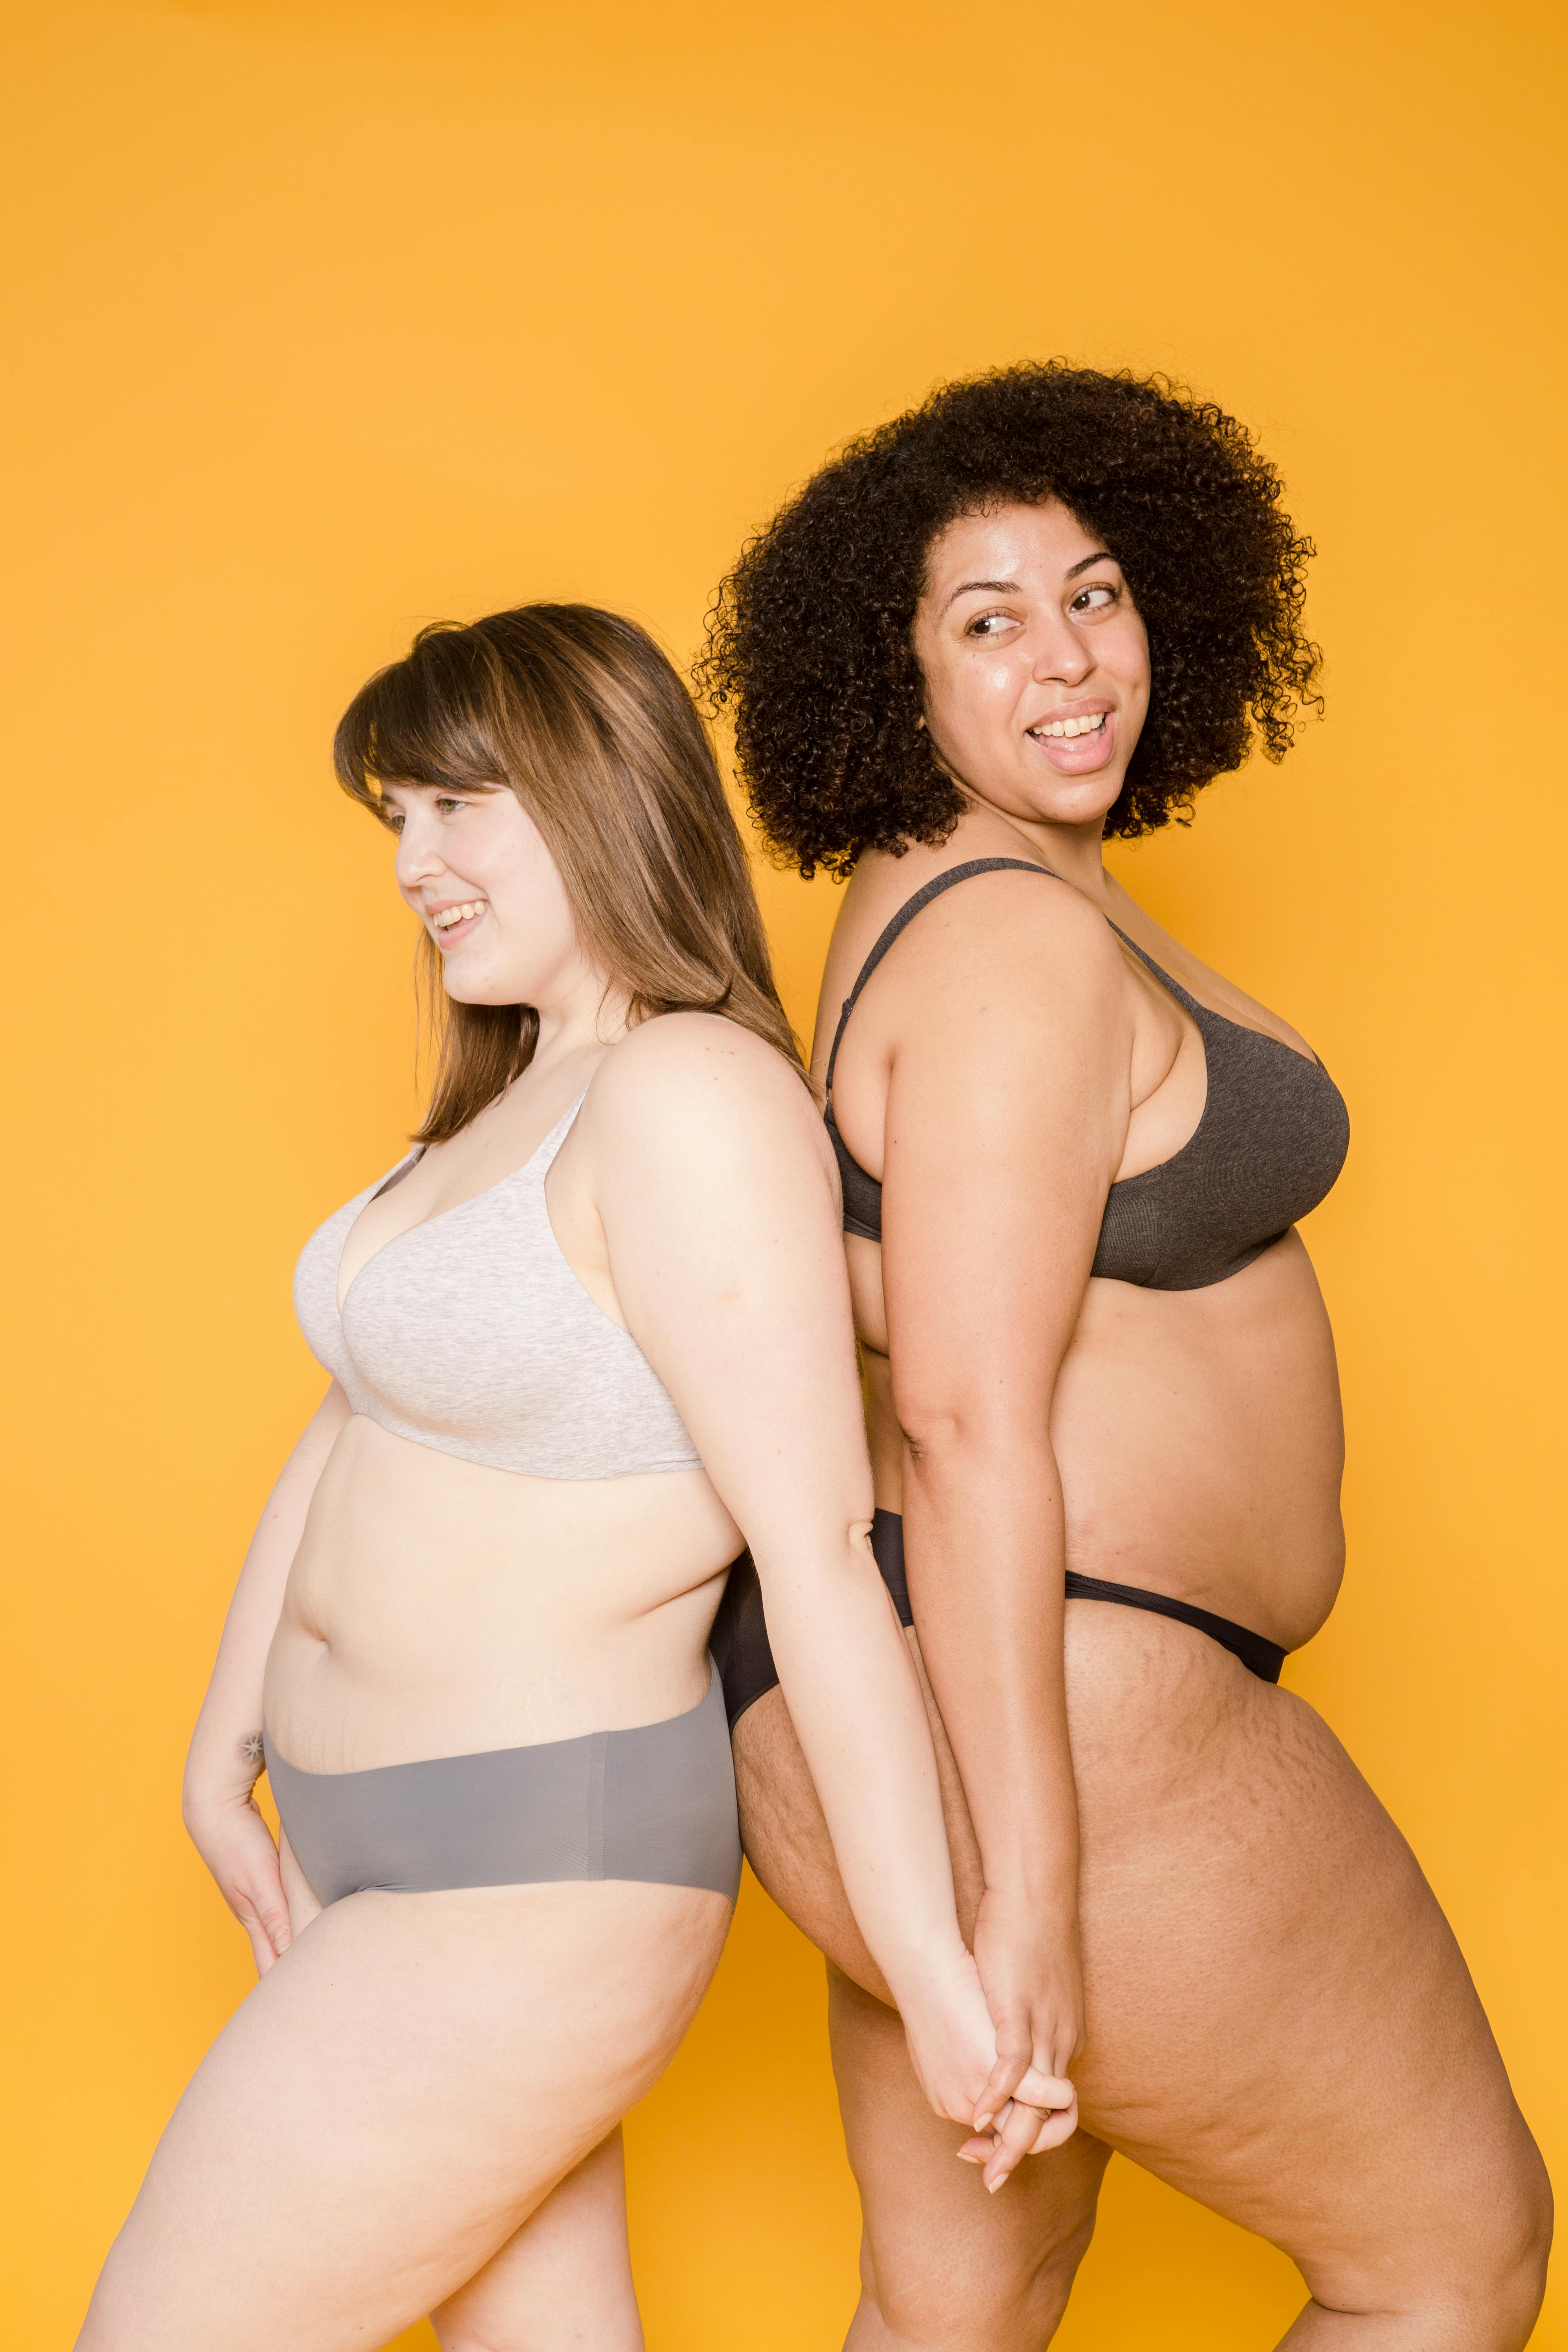 Cheerful plump diverse models in underclothes on yellow background · Free  Stock Photo